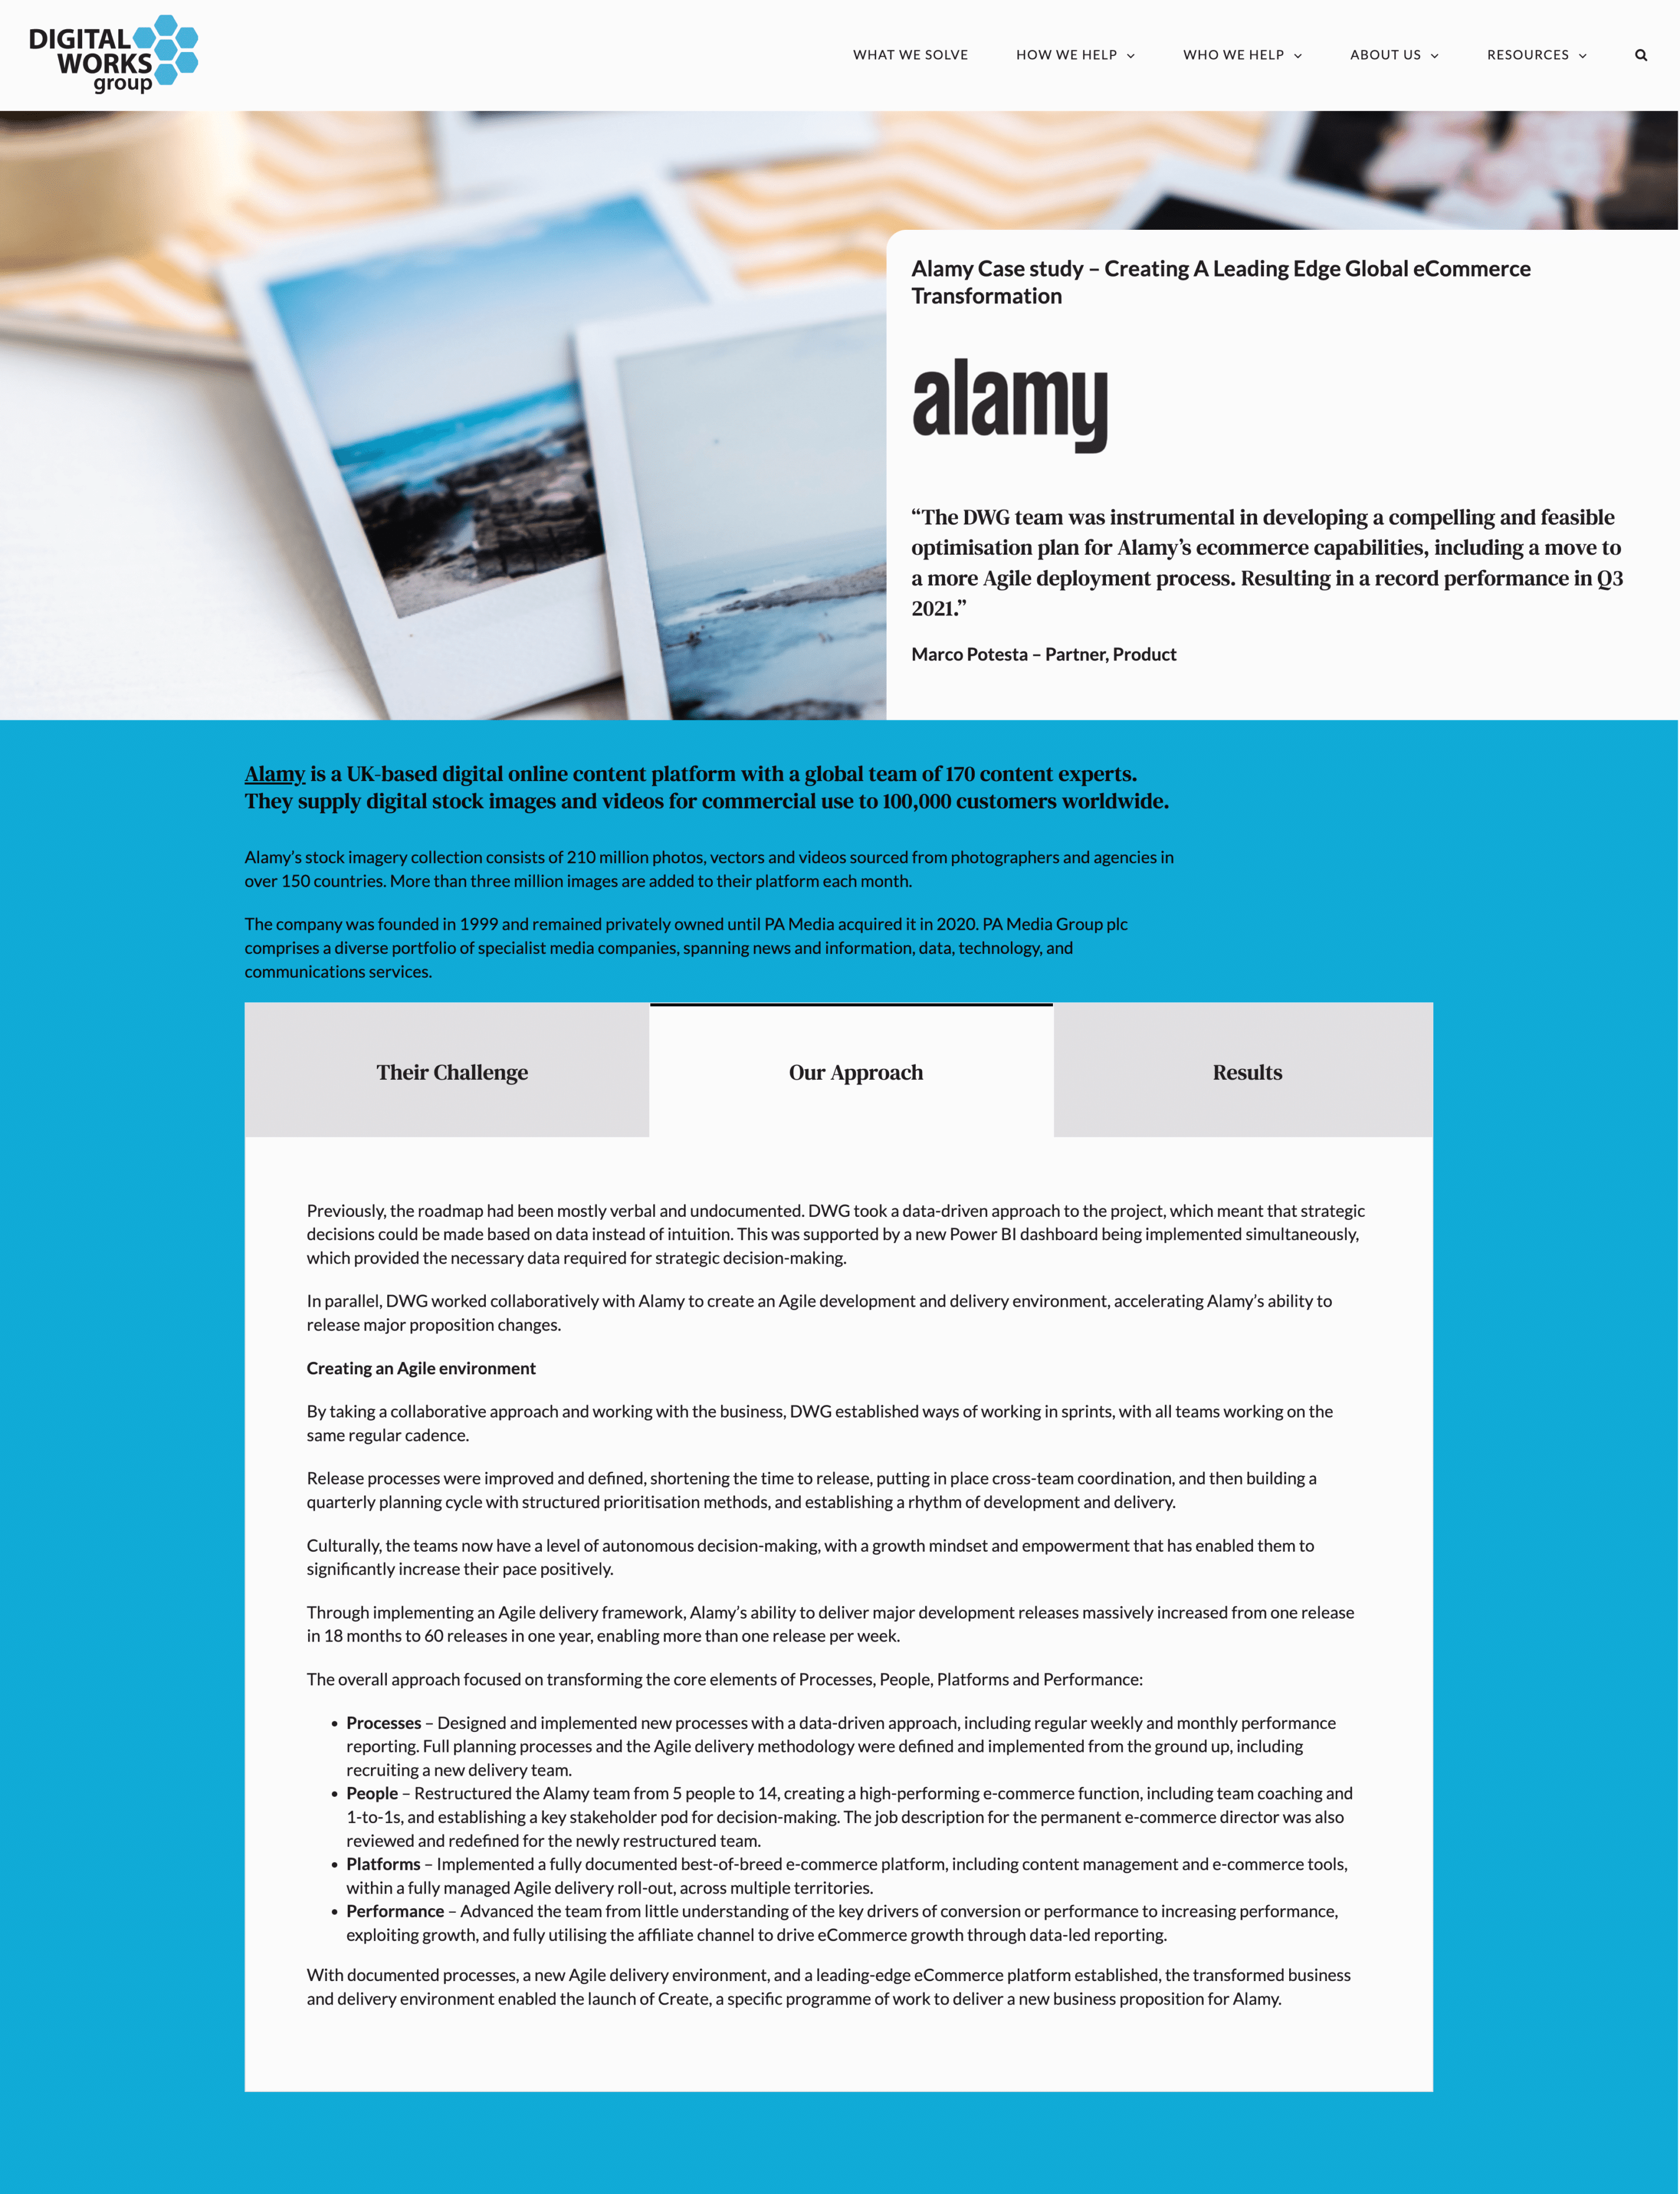 DWG - Alamy Case Study - The Approach